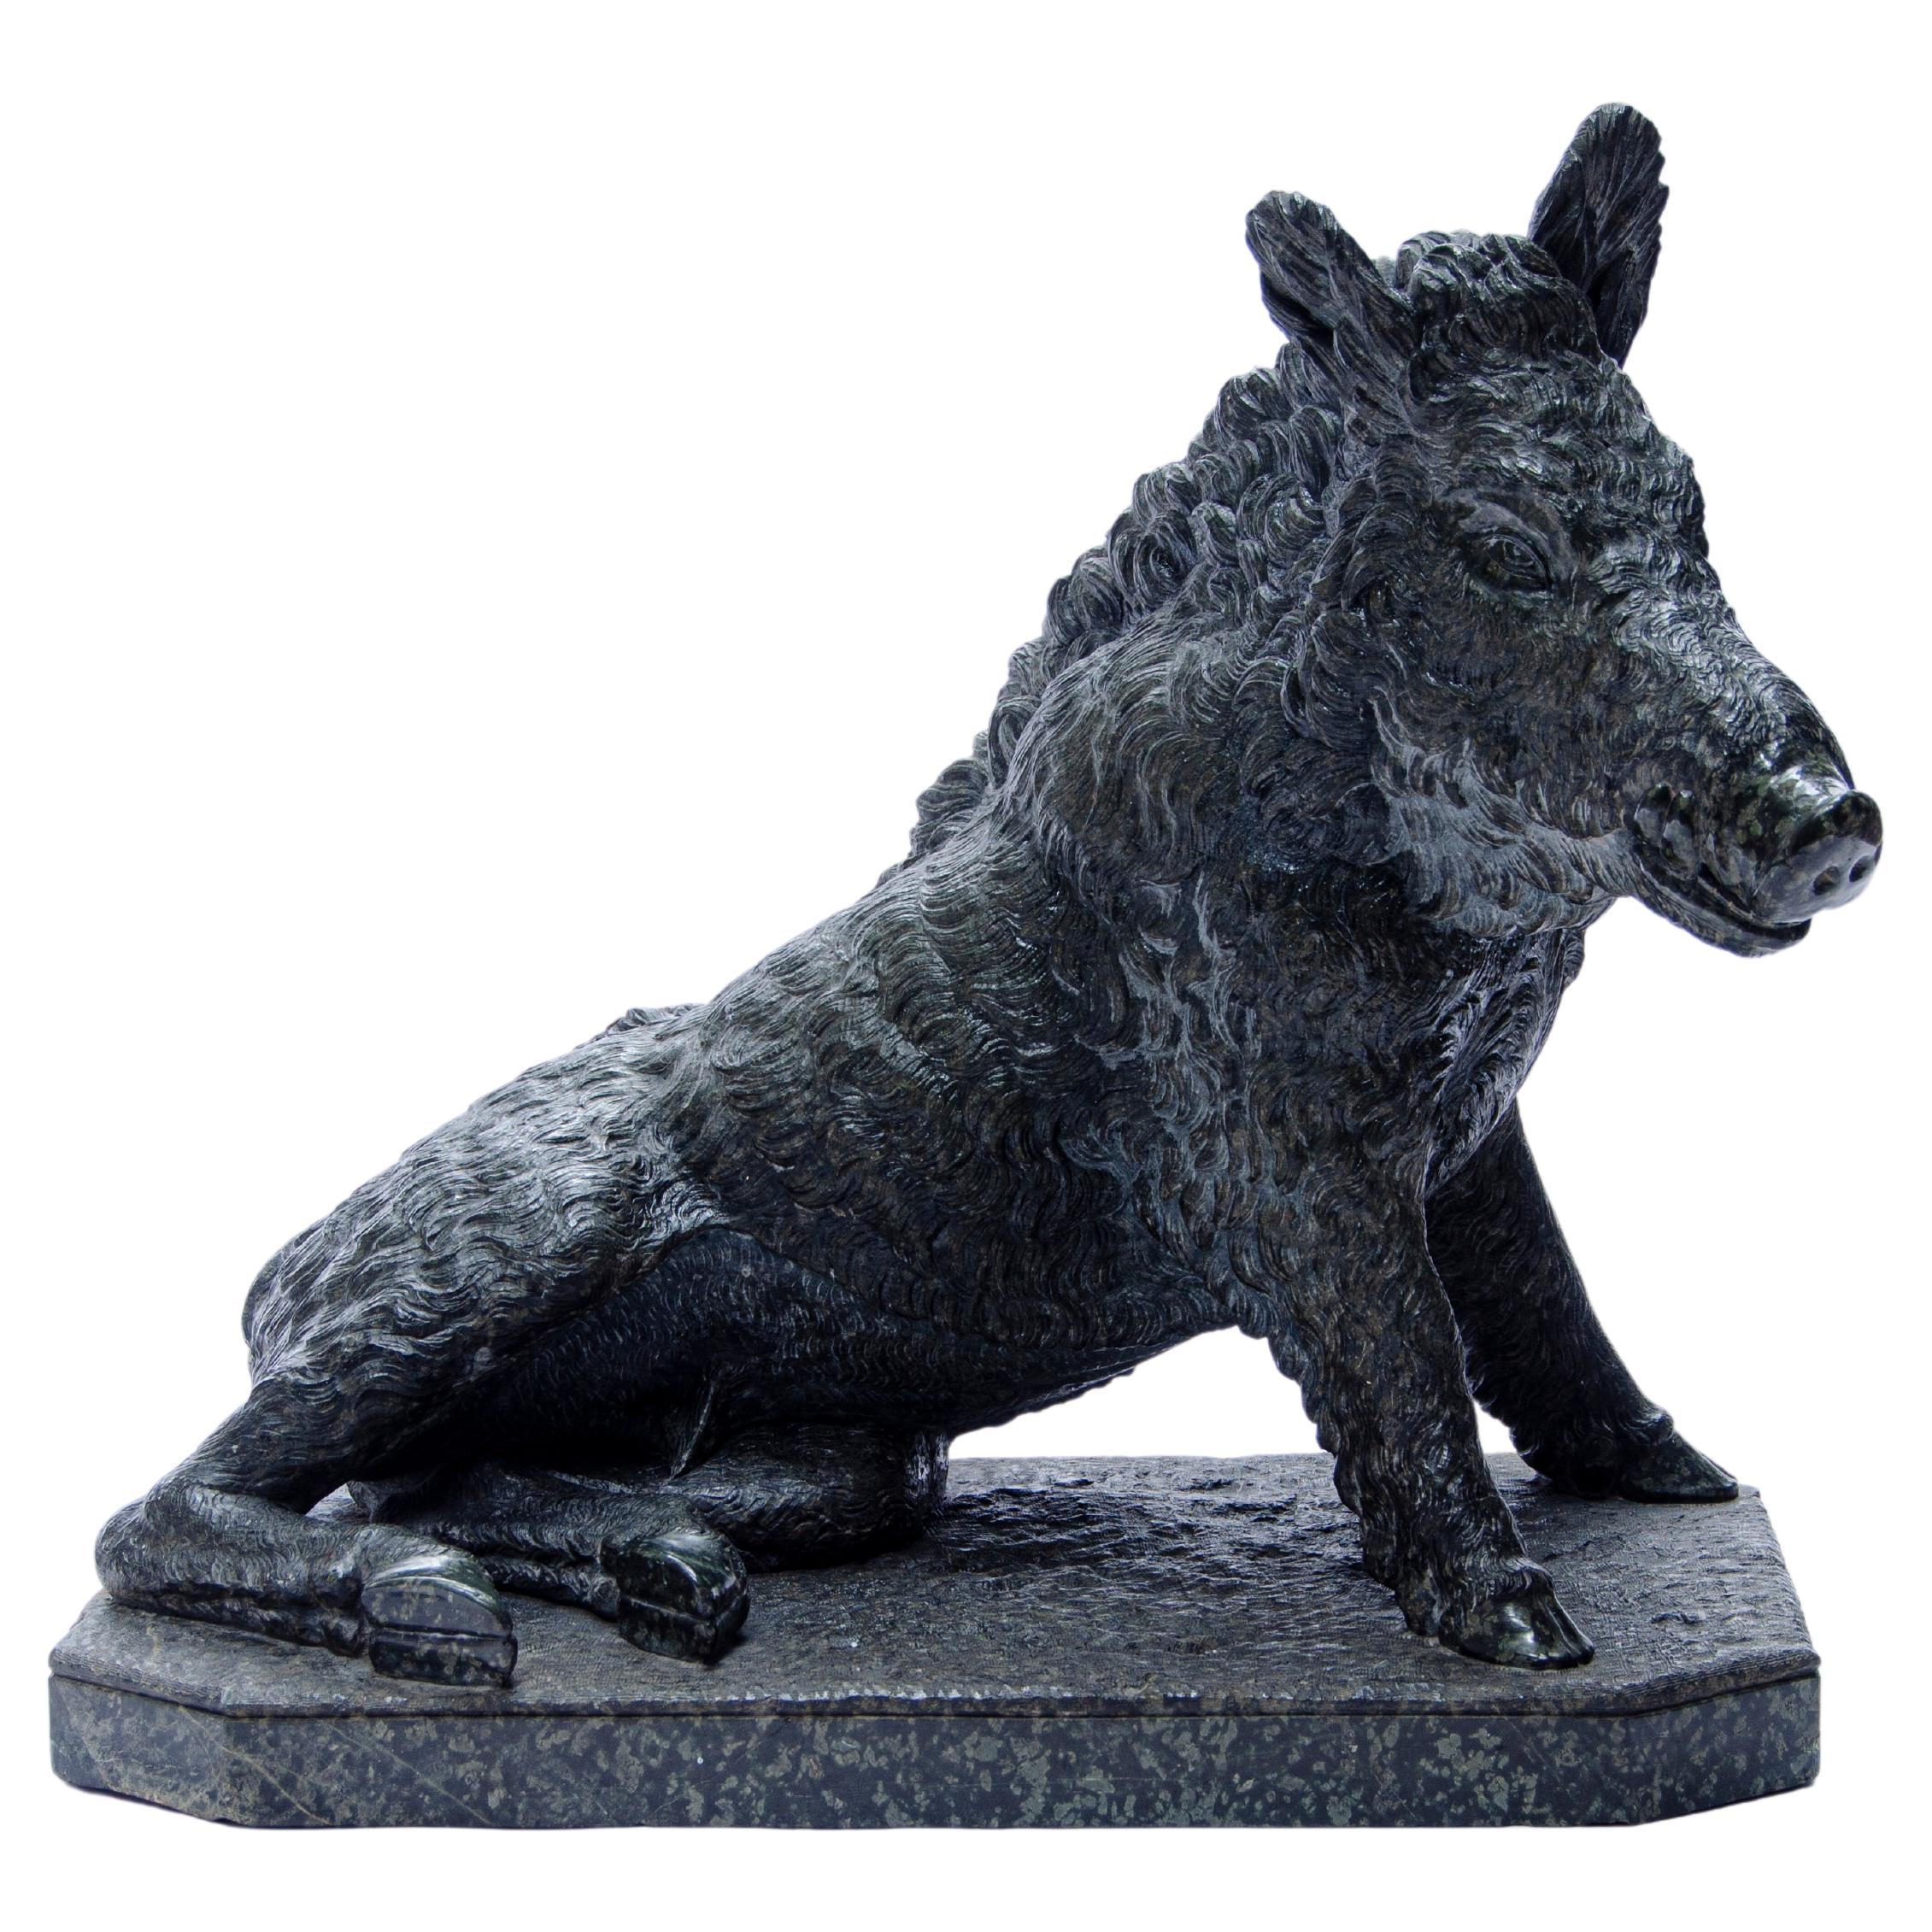 "Il Porcellino" or the Boar of the Ufizzi by Pietro Tacca For Sale